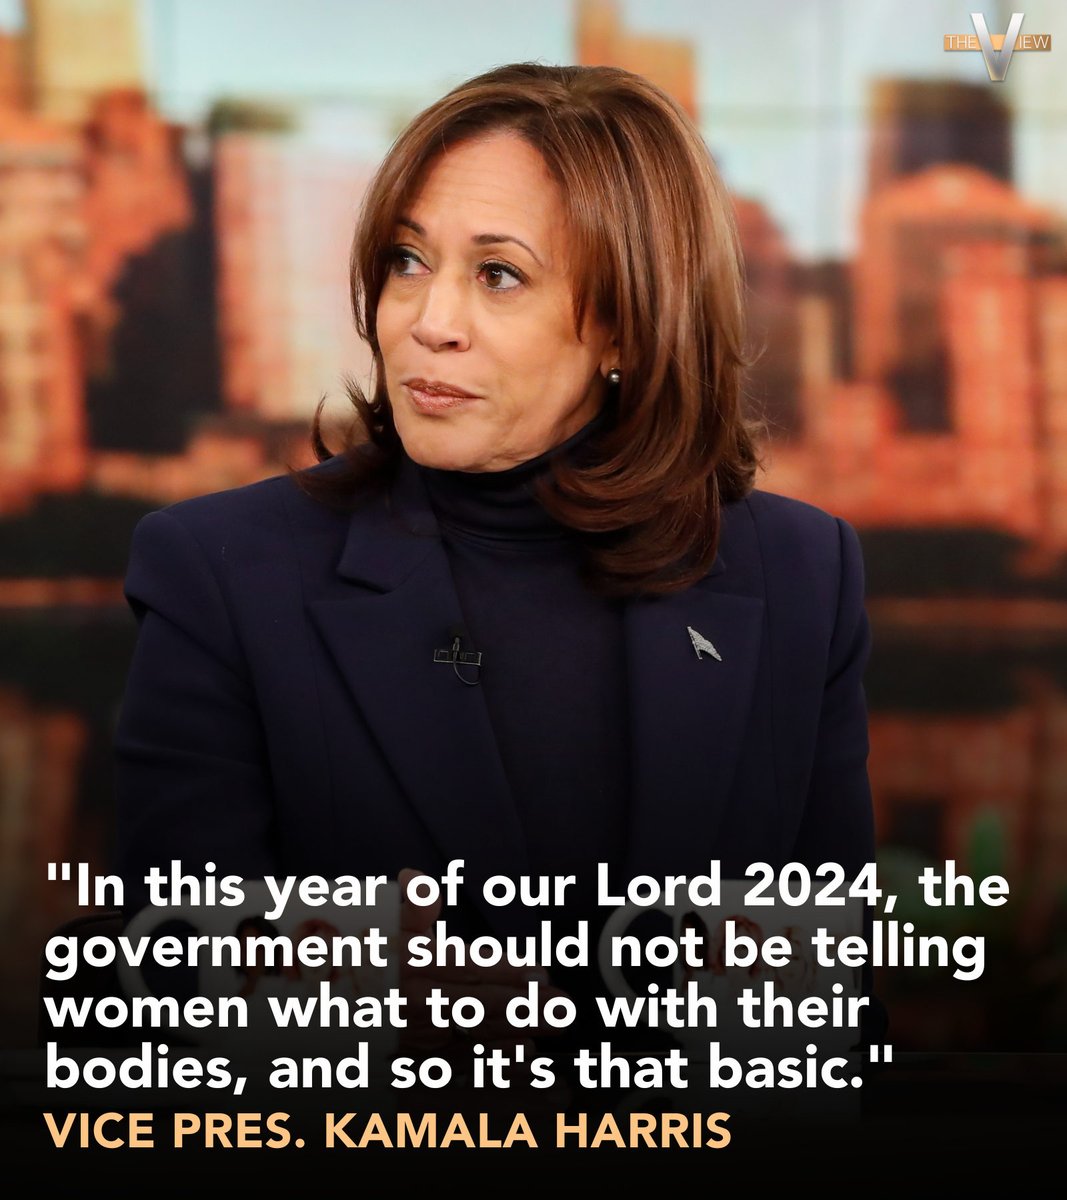 'The government should not be telling women what to do with their bodies,' Vice Pres. Harris tells the co-hosts. WATCH: abcnews.go.com/theview/video/…